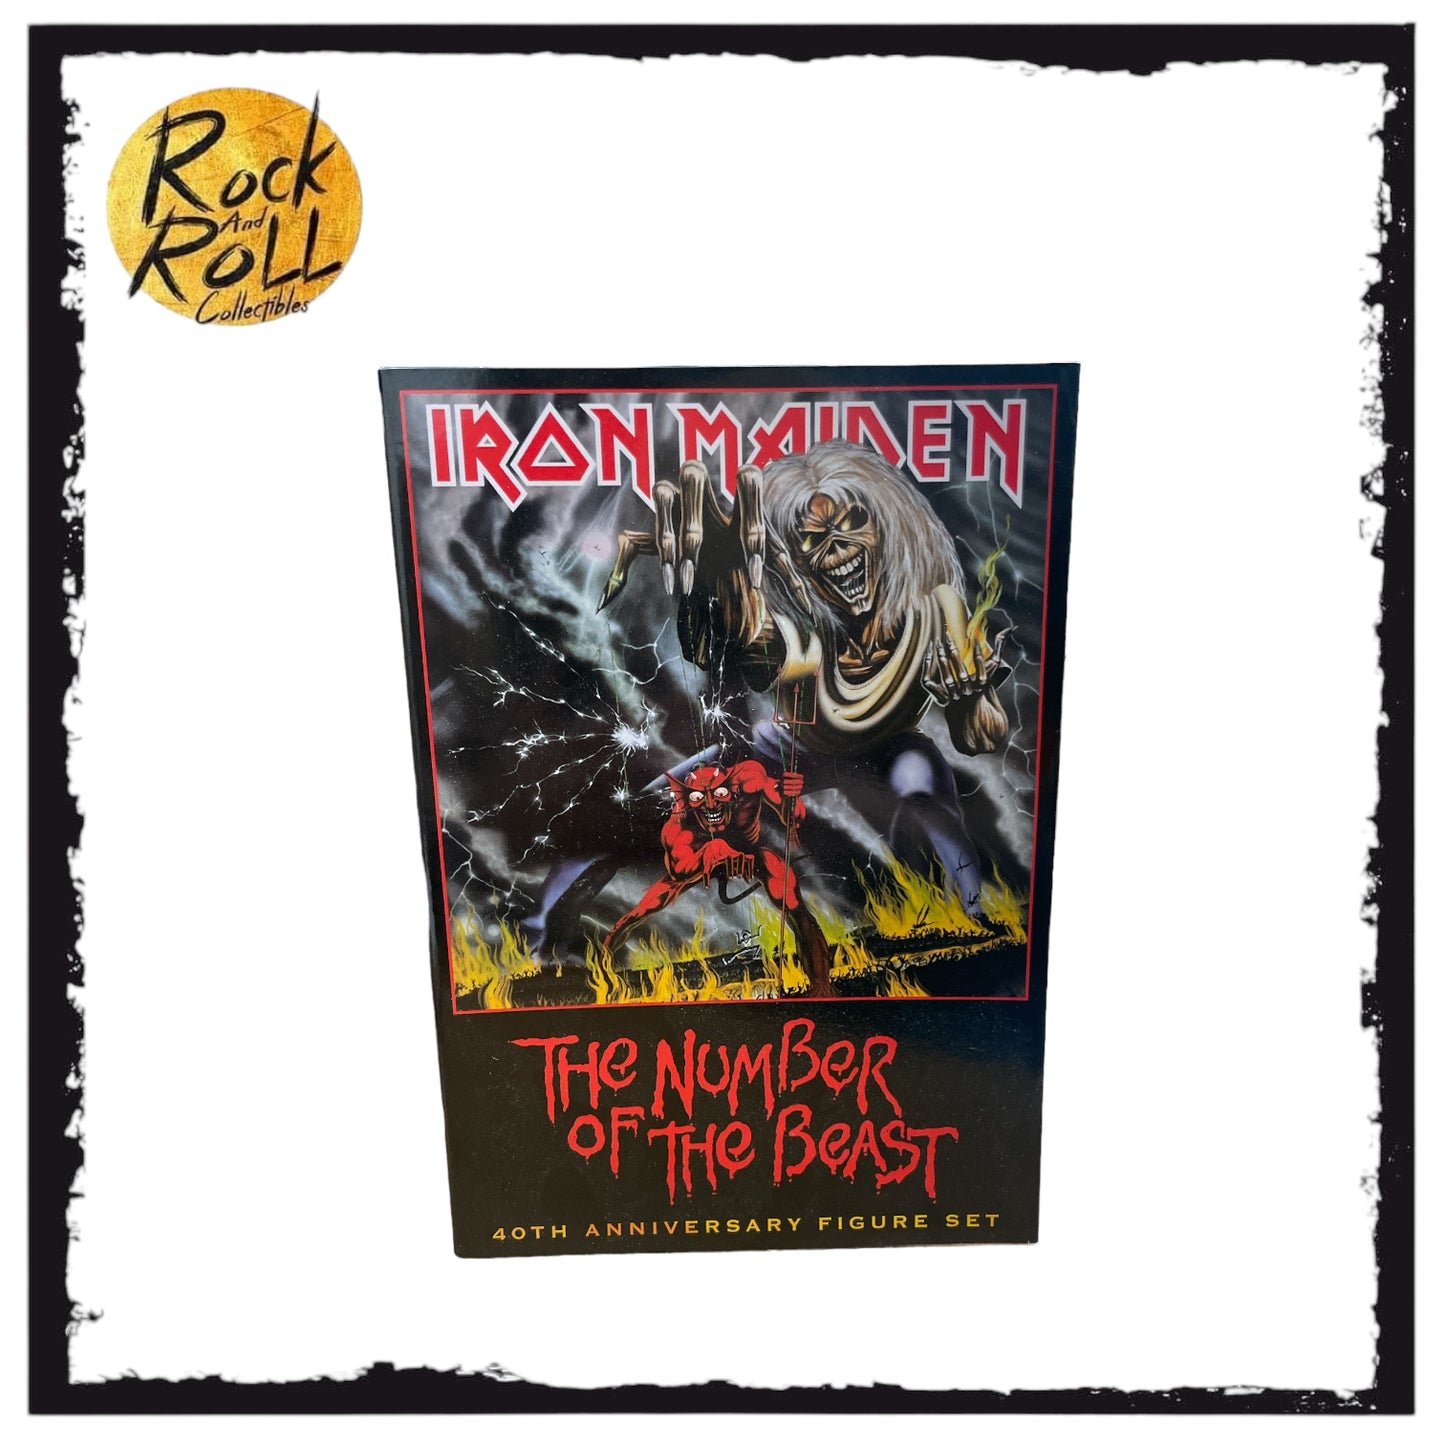 Damaged- IRON MAIDEN ULTIMATE NUMBER OF THE BEAST (40TH ANNIVERSARY) 7” SCALE ACTION FIGURE SET - NECA